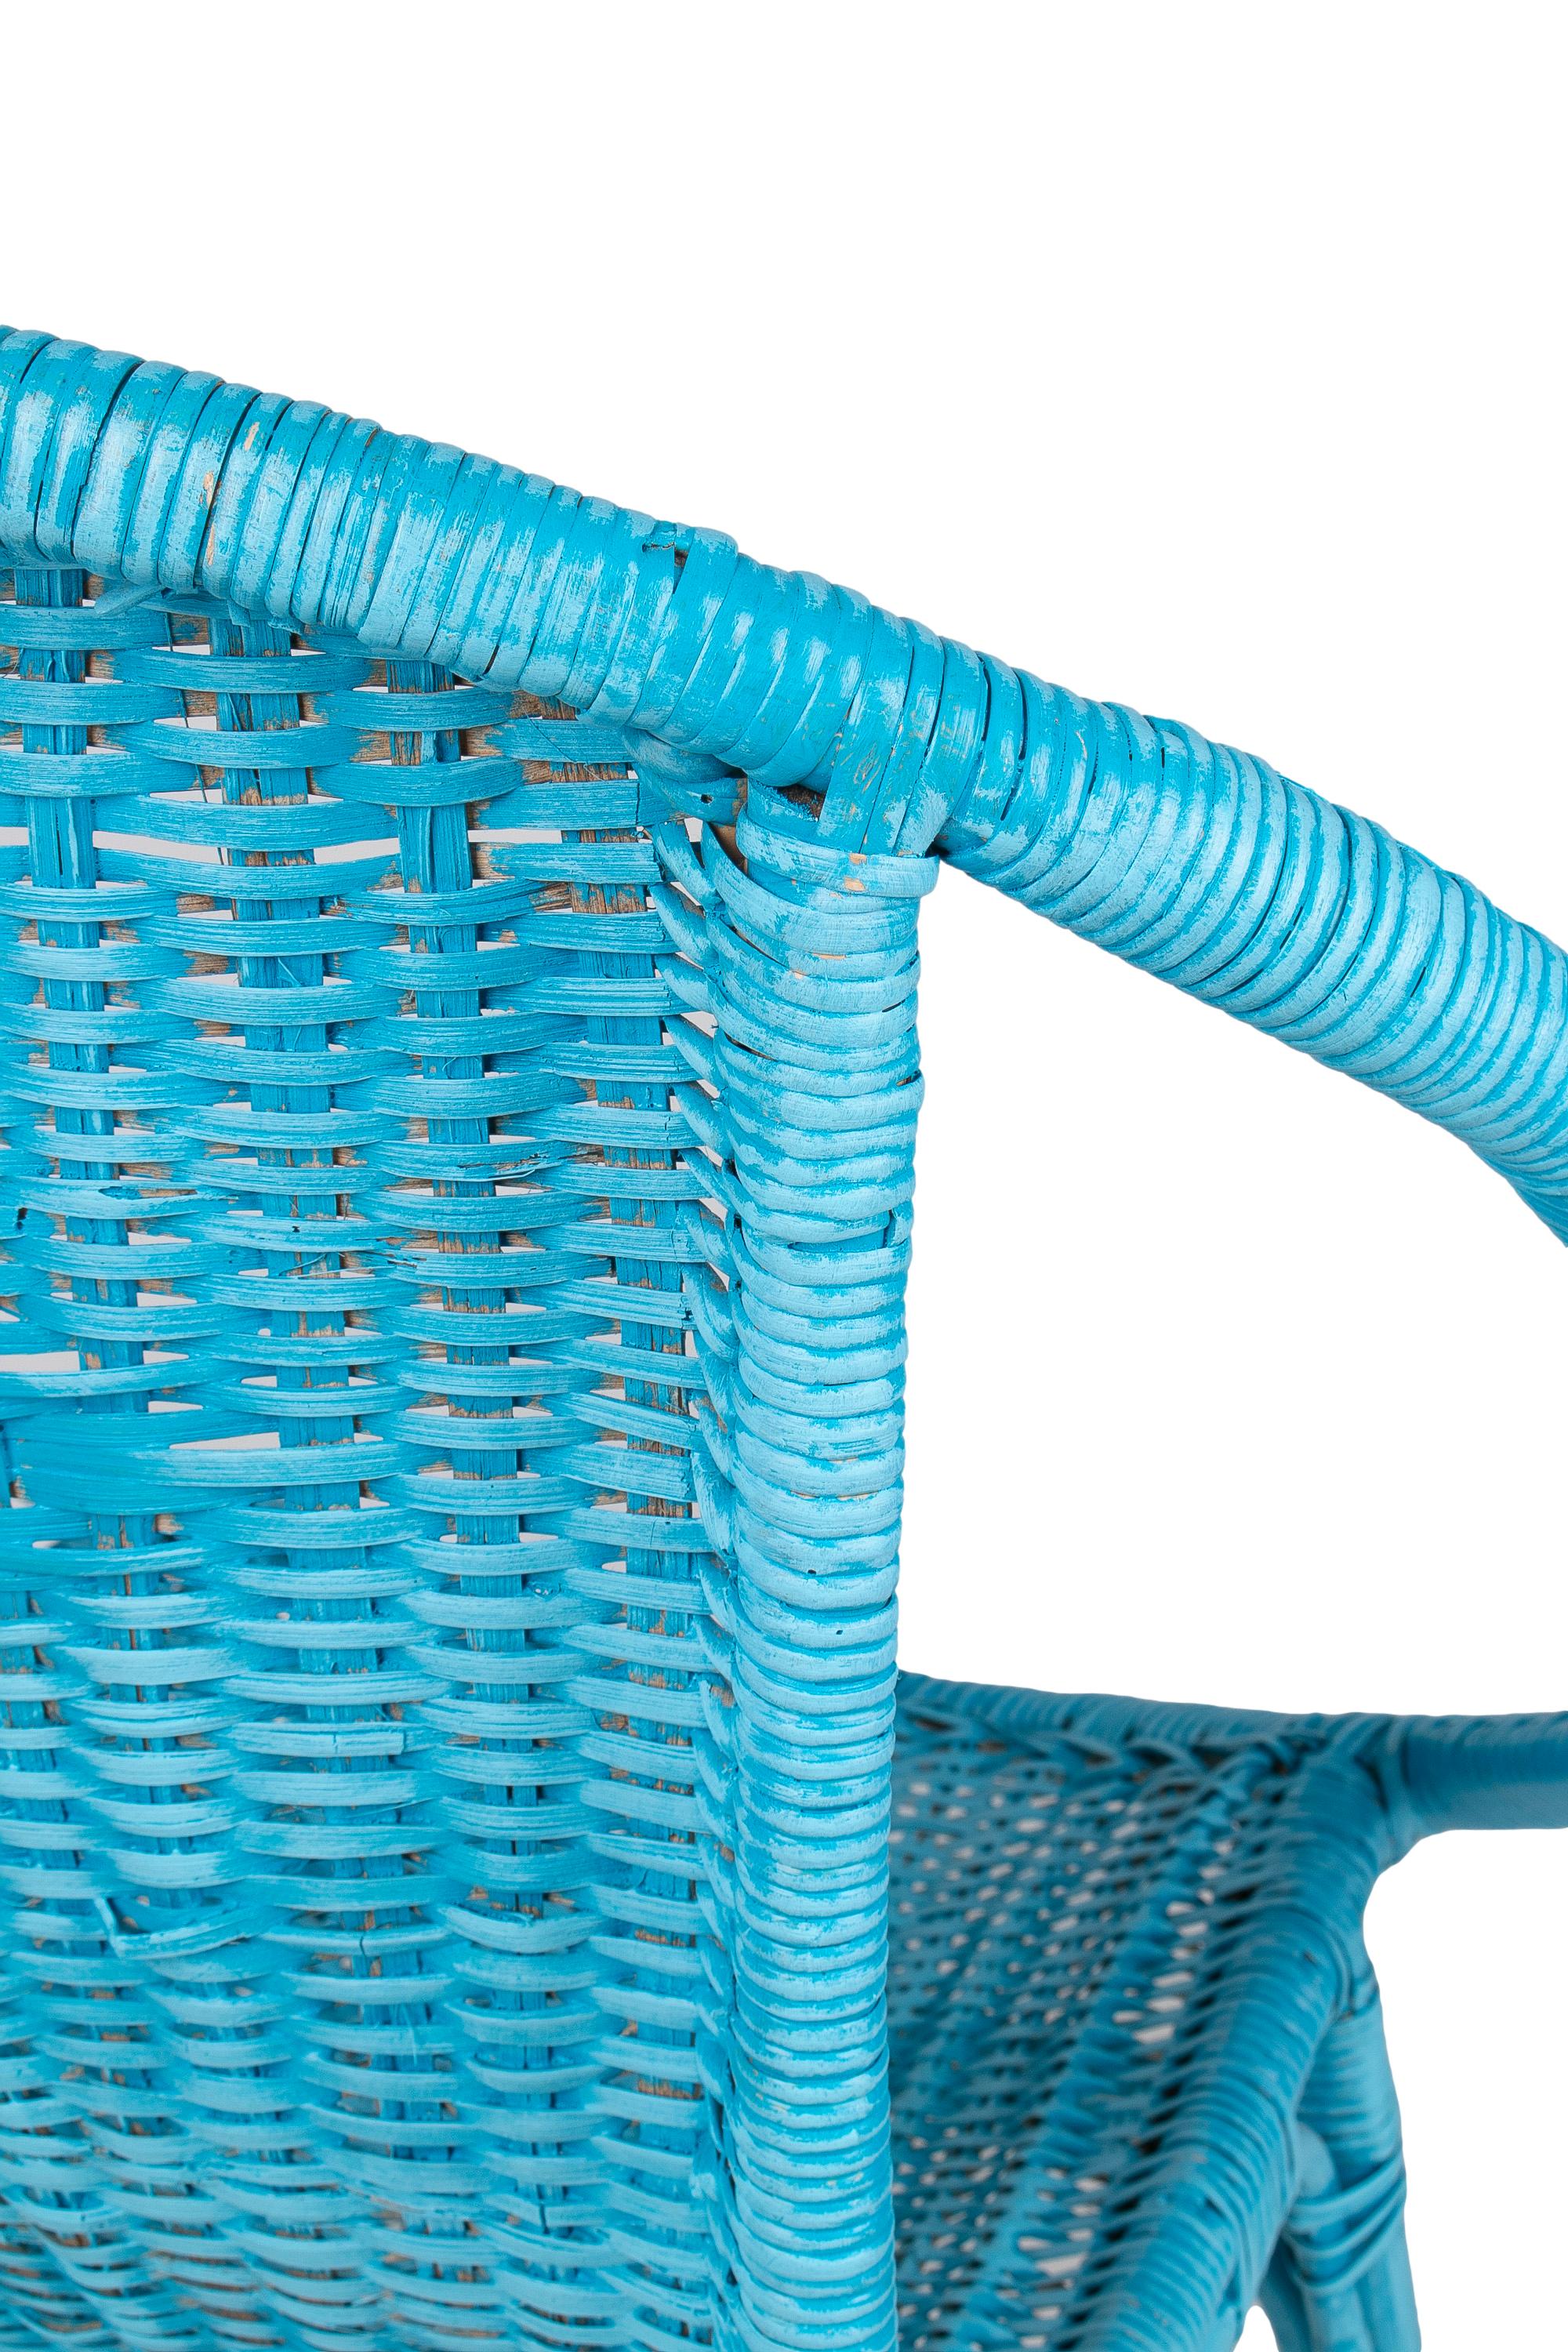 Pair of 1970s Spanish Woven Wicker Blue Chairs For Sale 8